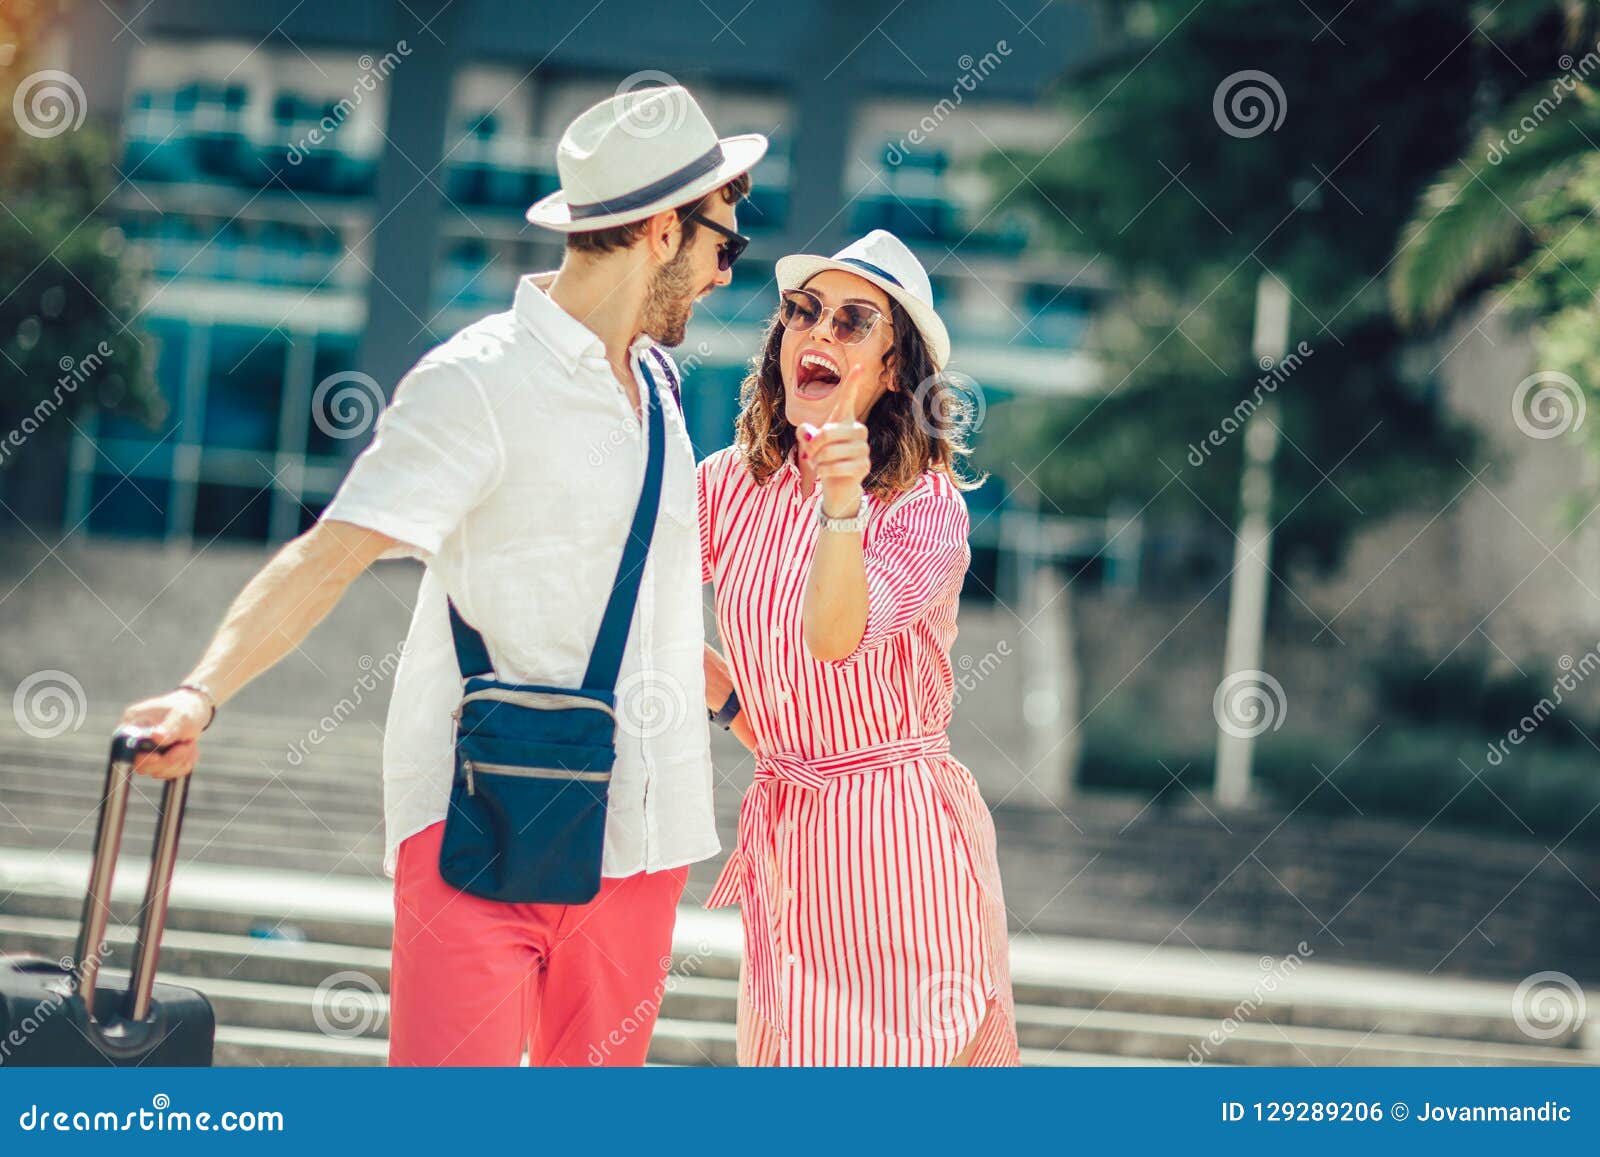 young travellers couple looking for hotel